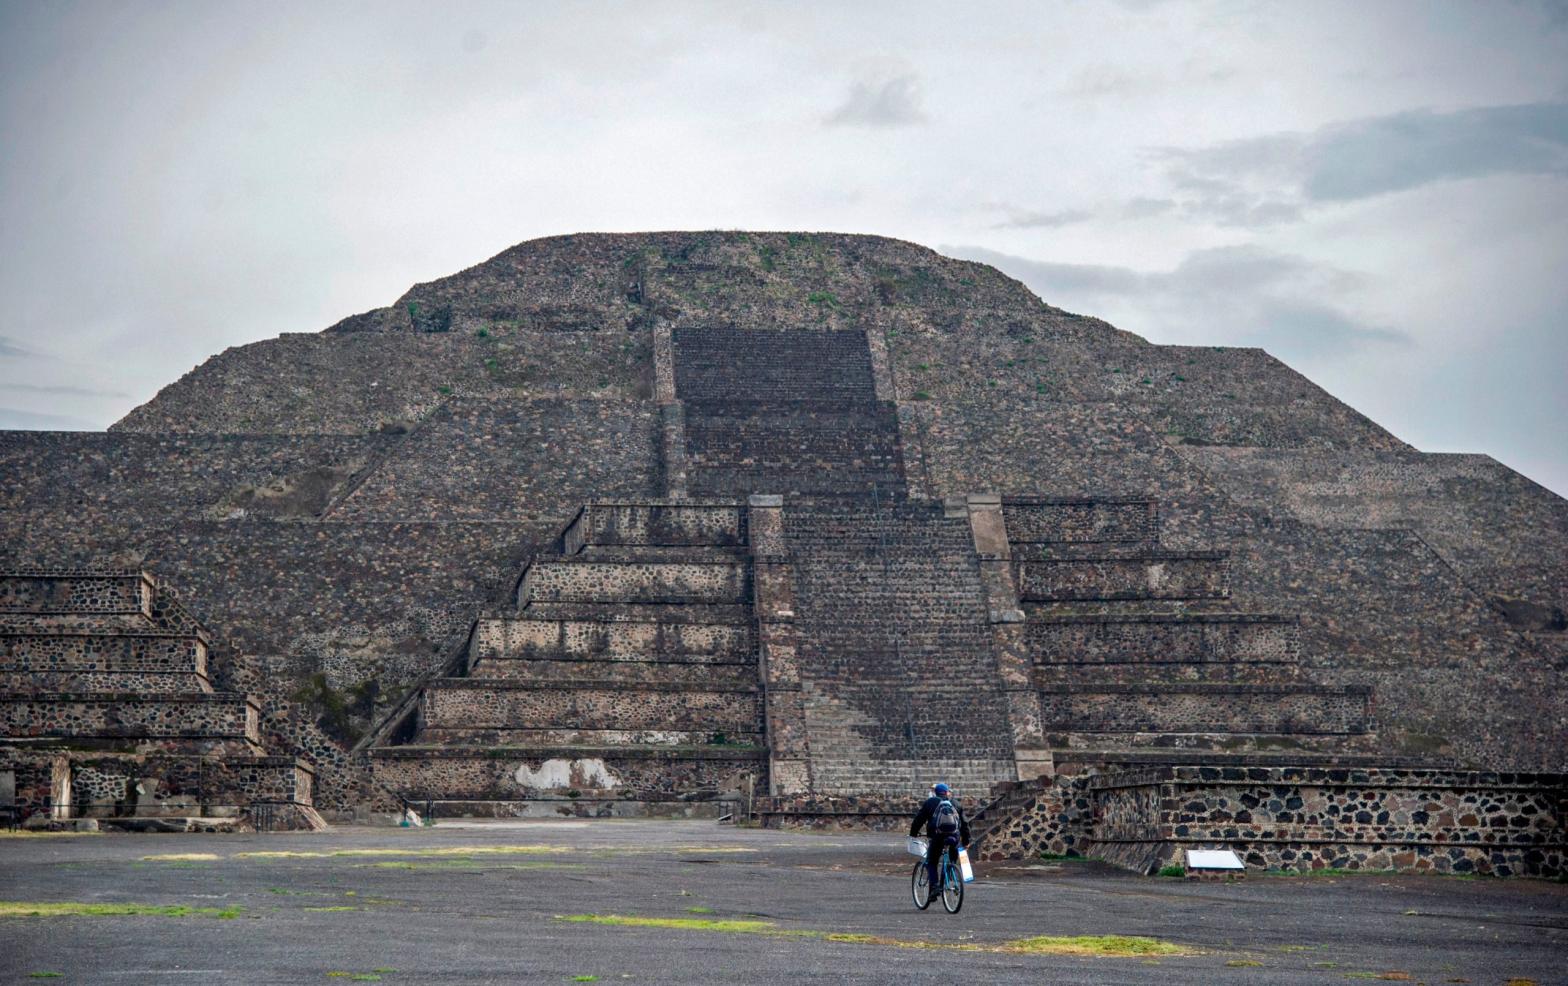 The Pyramid of the Moon at Teotihuacán, Mexico. (Photo: Claudio CRUZ / AFP, Getty Images)